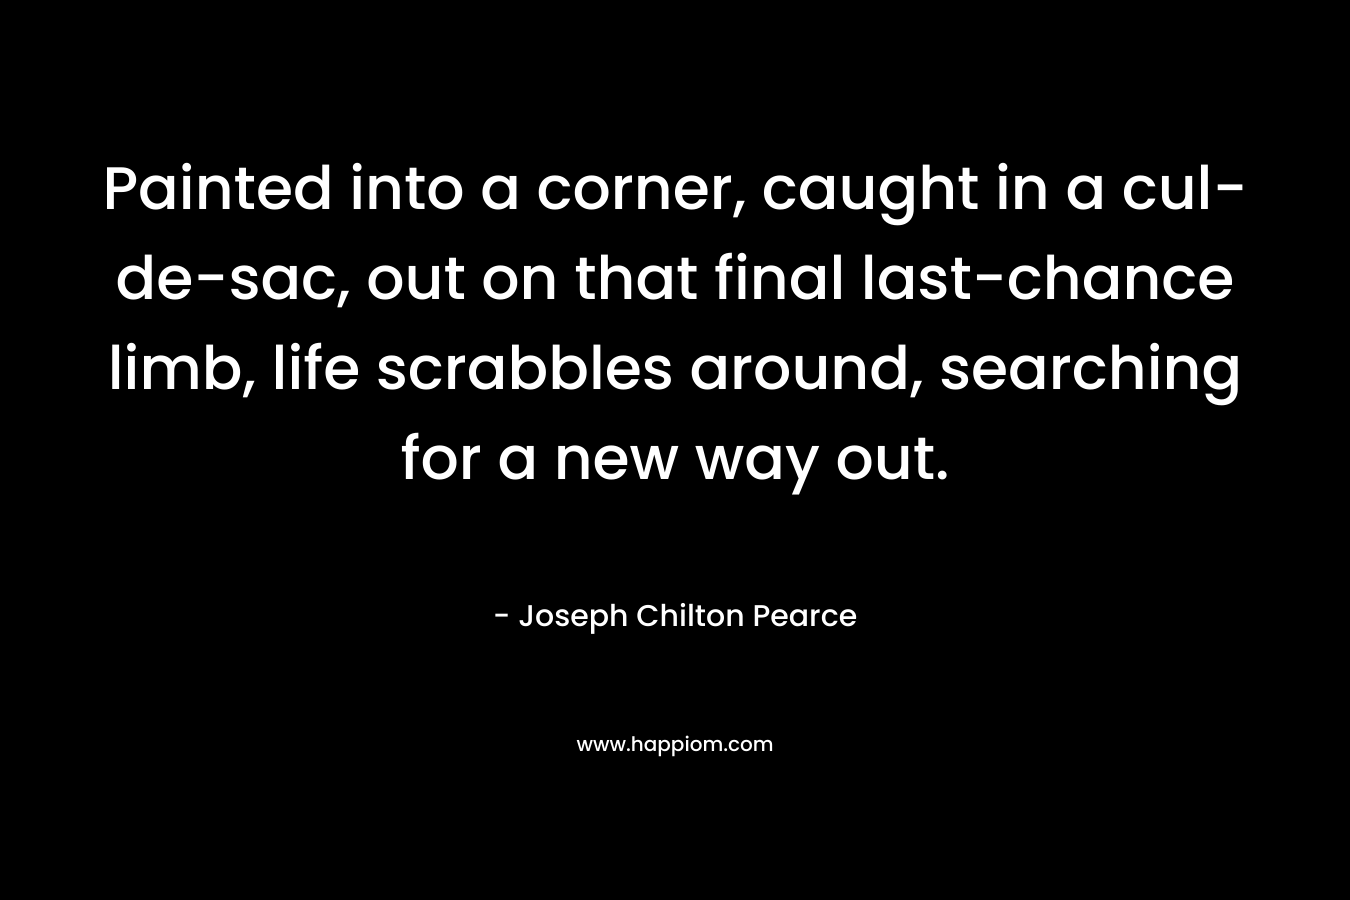 Painted into a corner, caught in a cul-de-sac, out on that final last-chance limb, life scrabbles around, searching for a new way out. – Joseph Chilton Pearce